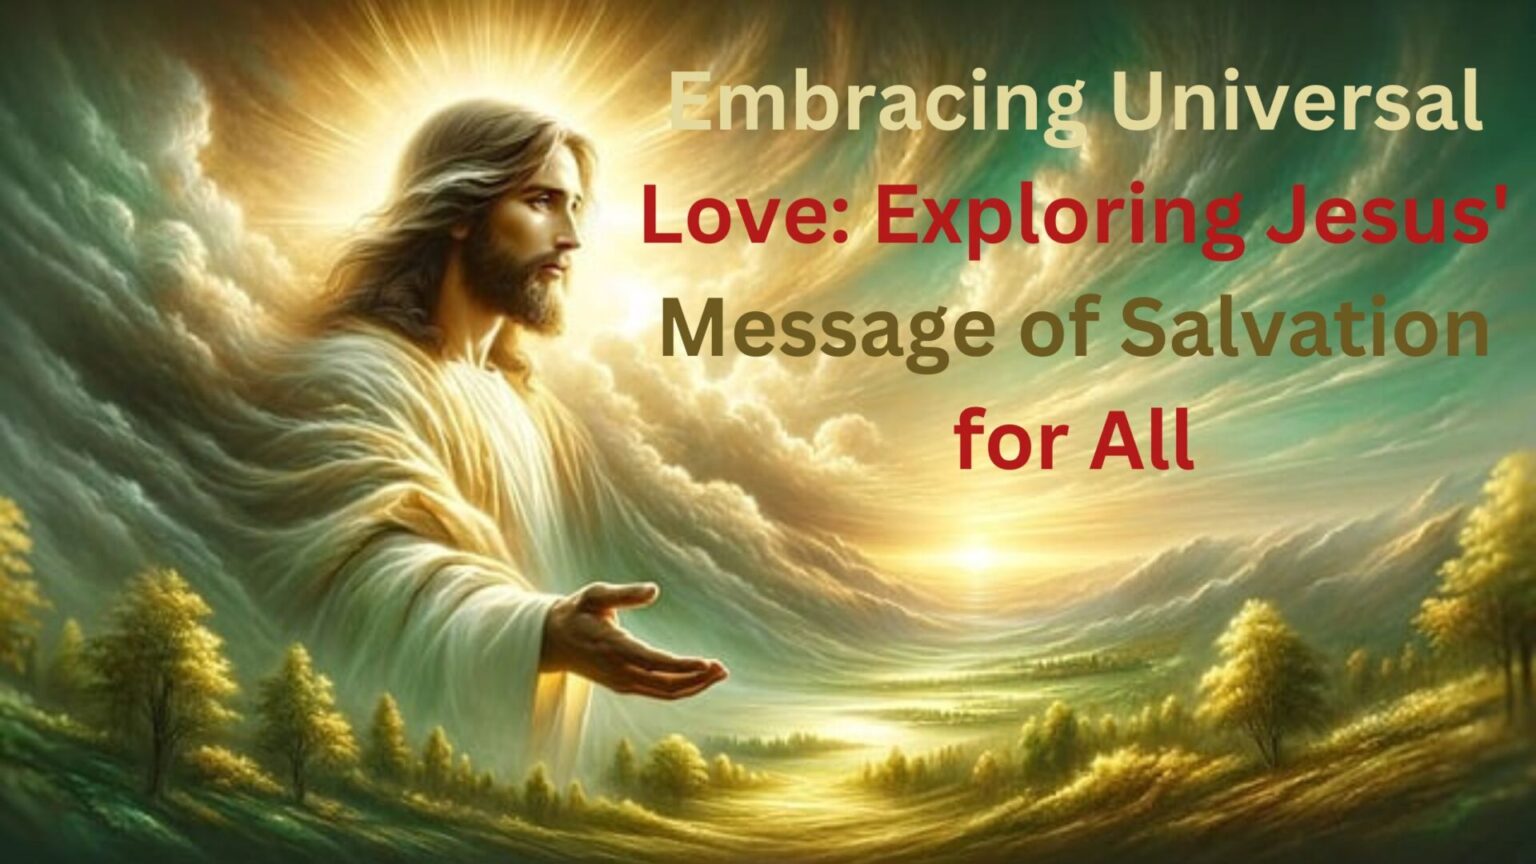 "Embracing Universal Love: Exploring Jesus' Message of Salvation for All"